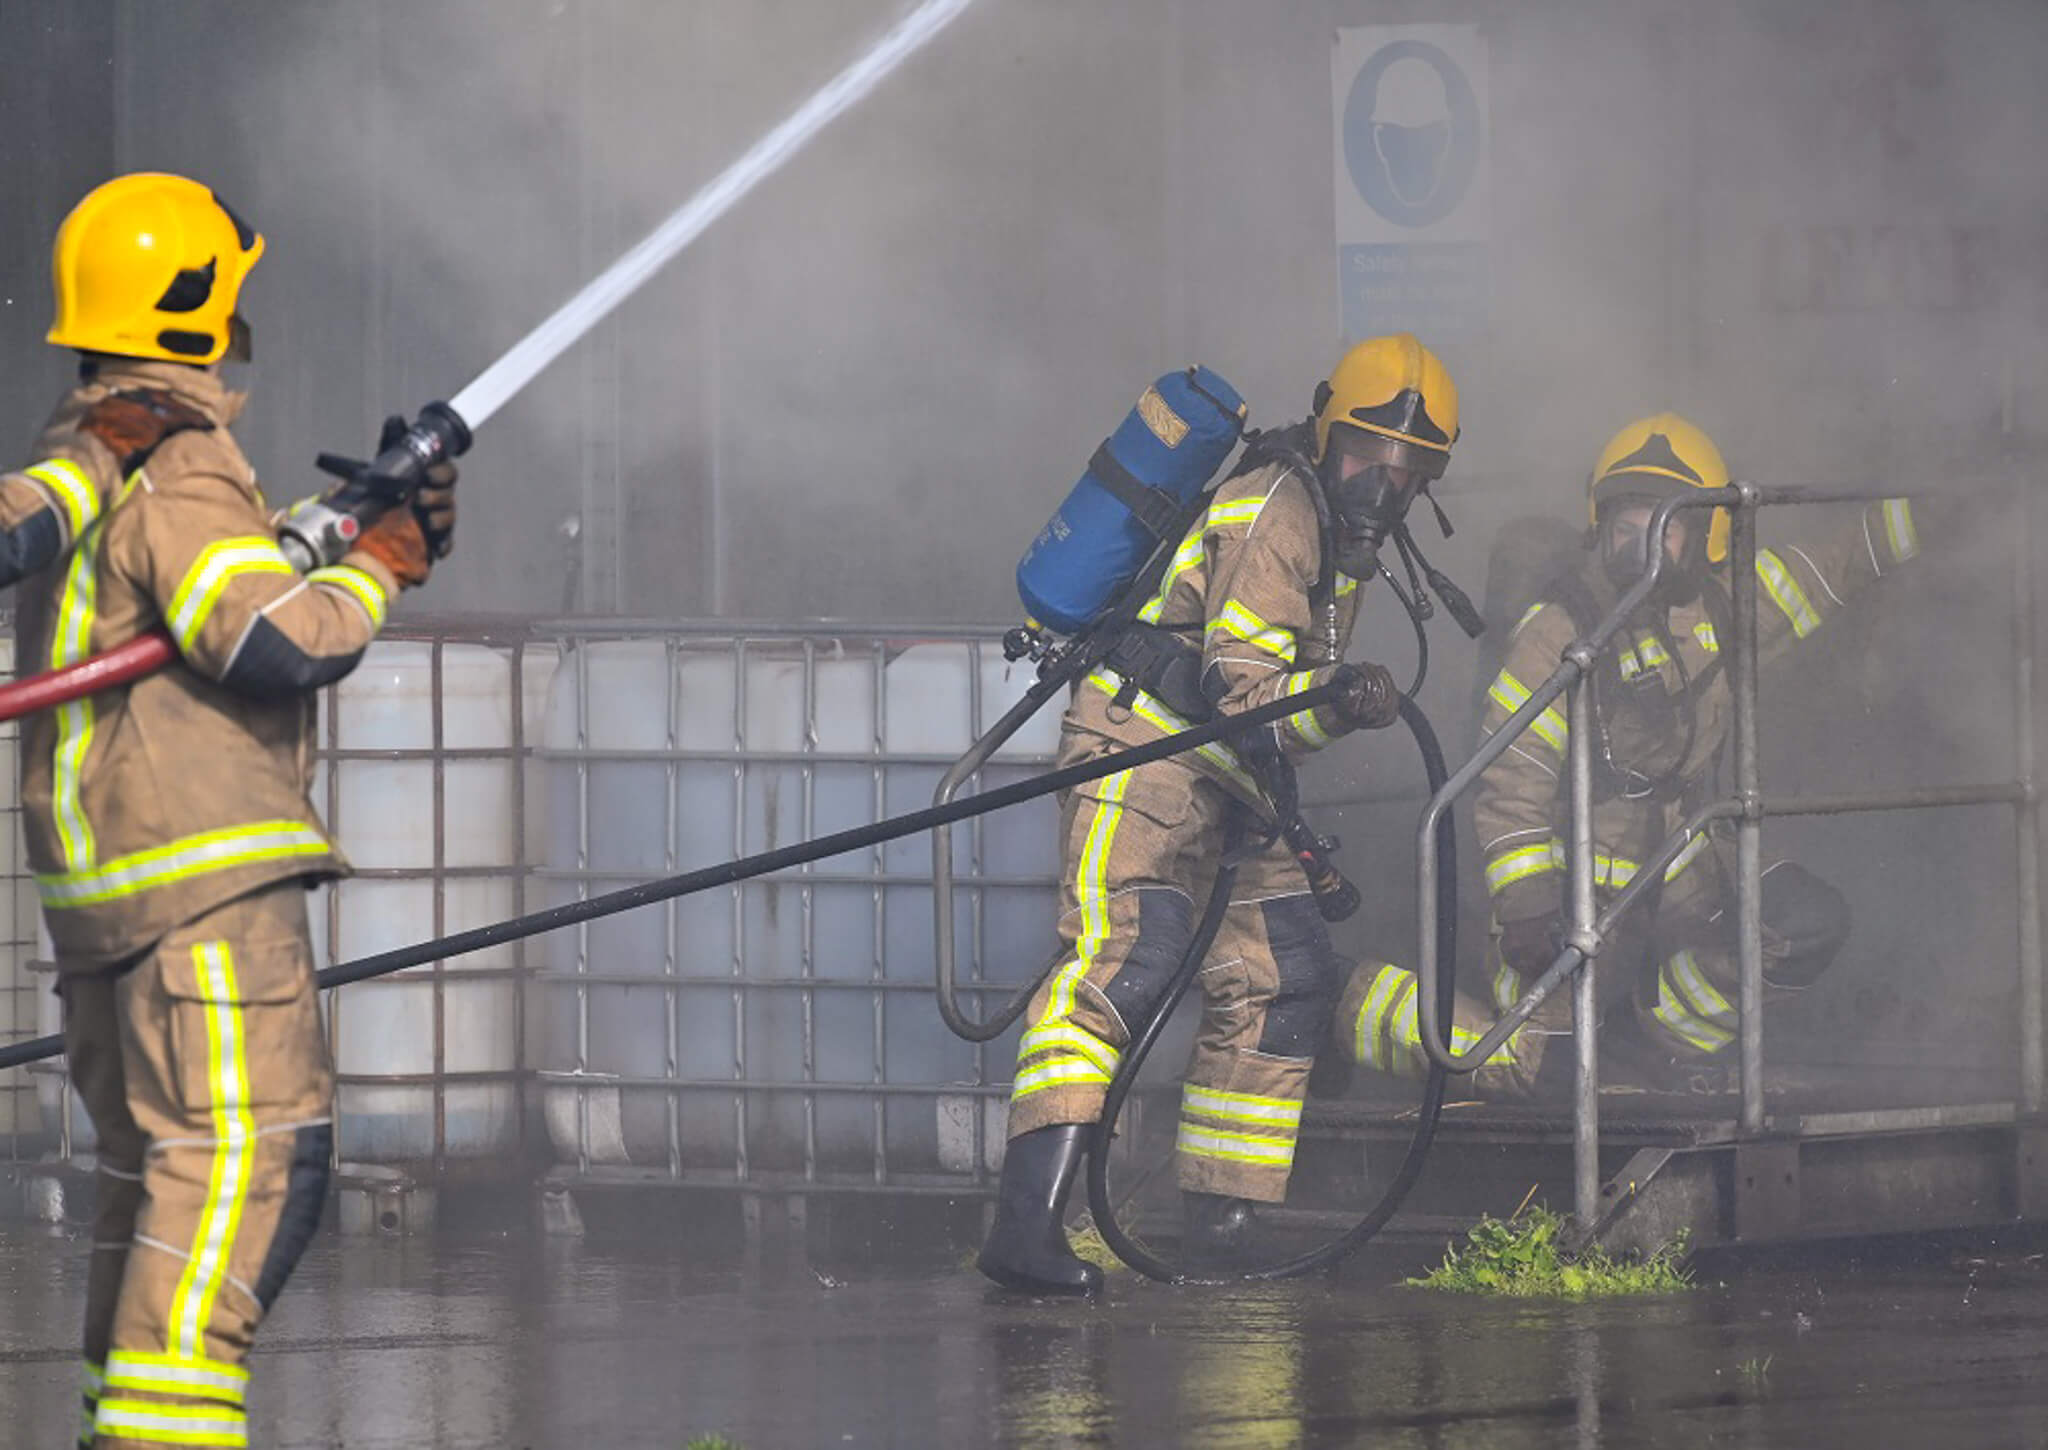 Firefighters in training with fire hose